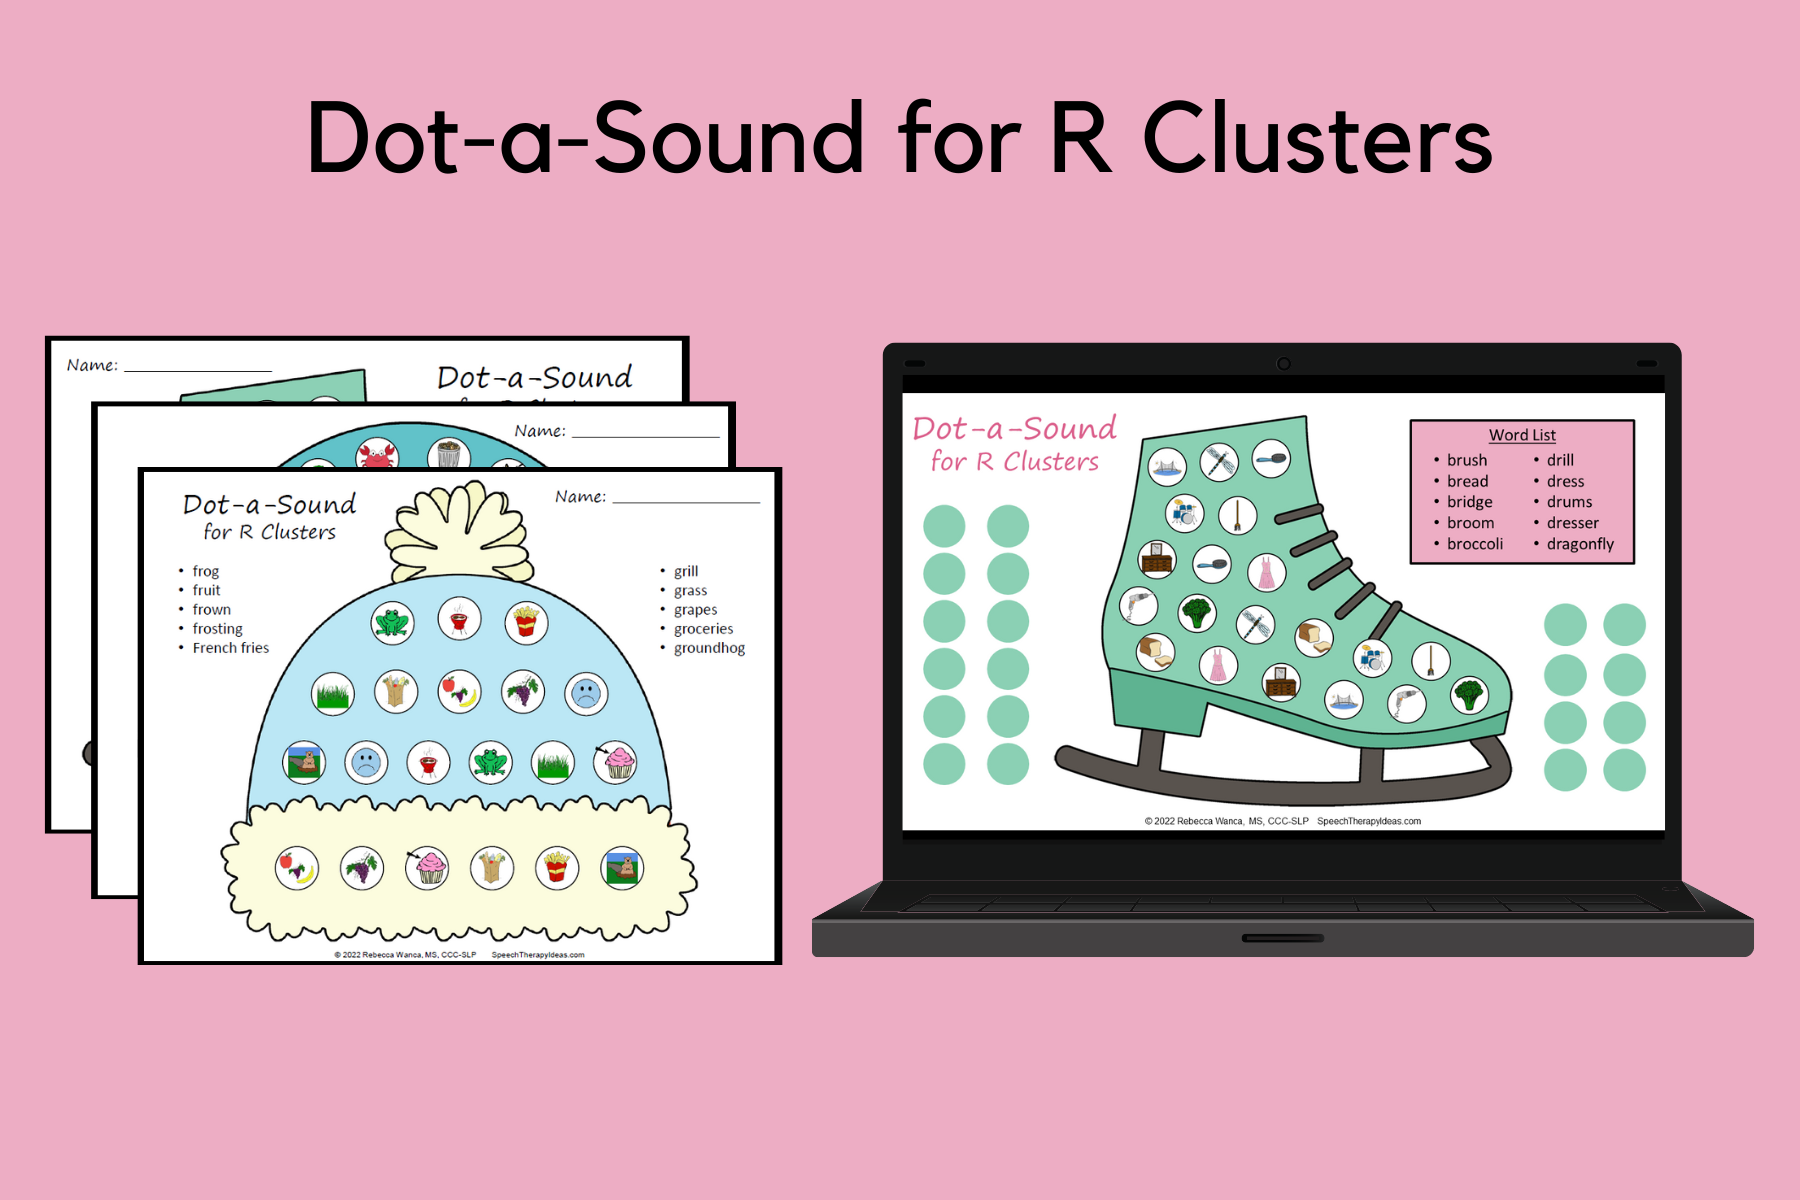 Dot-a-Sound for R Clusters